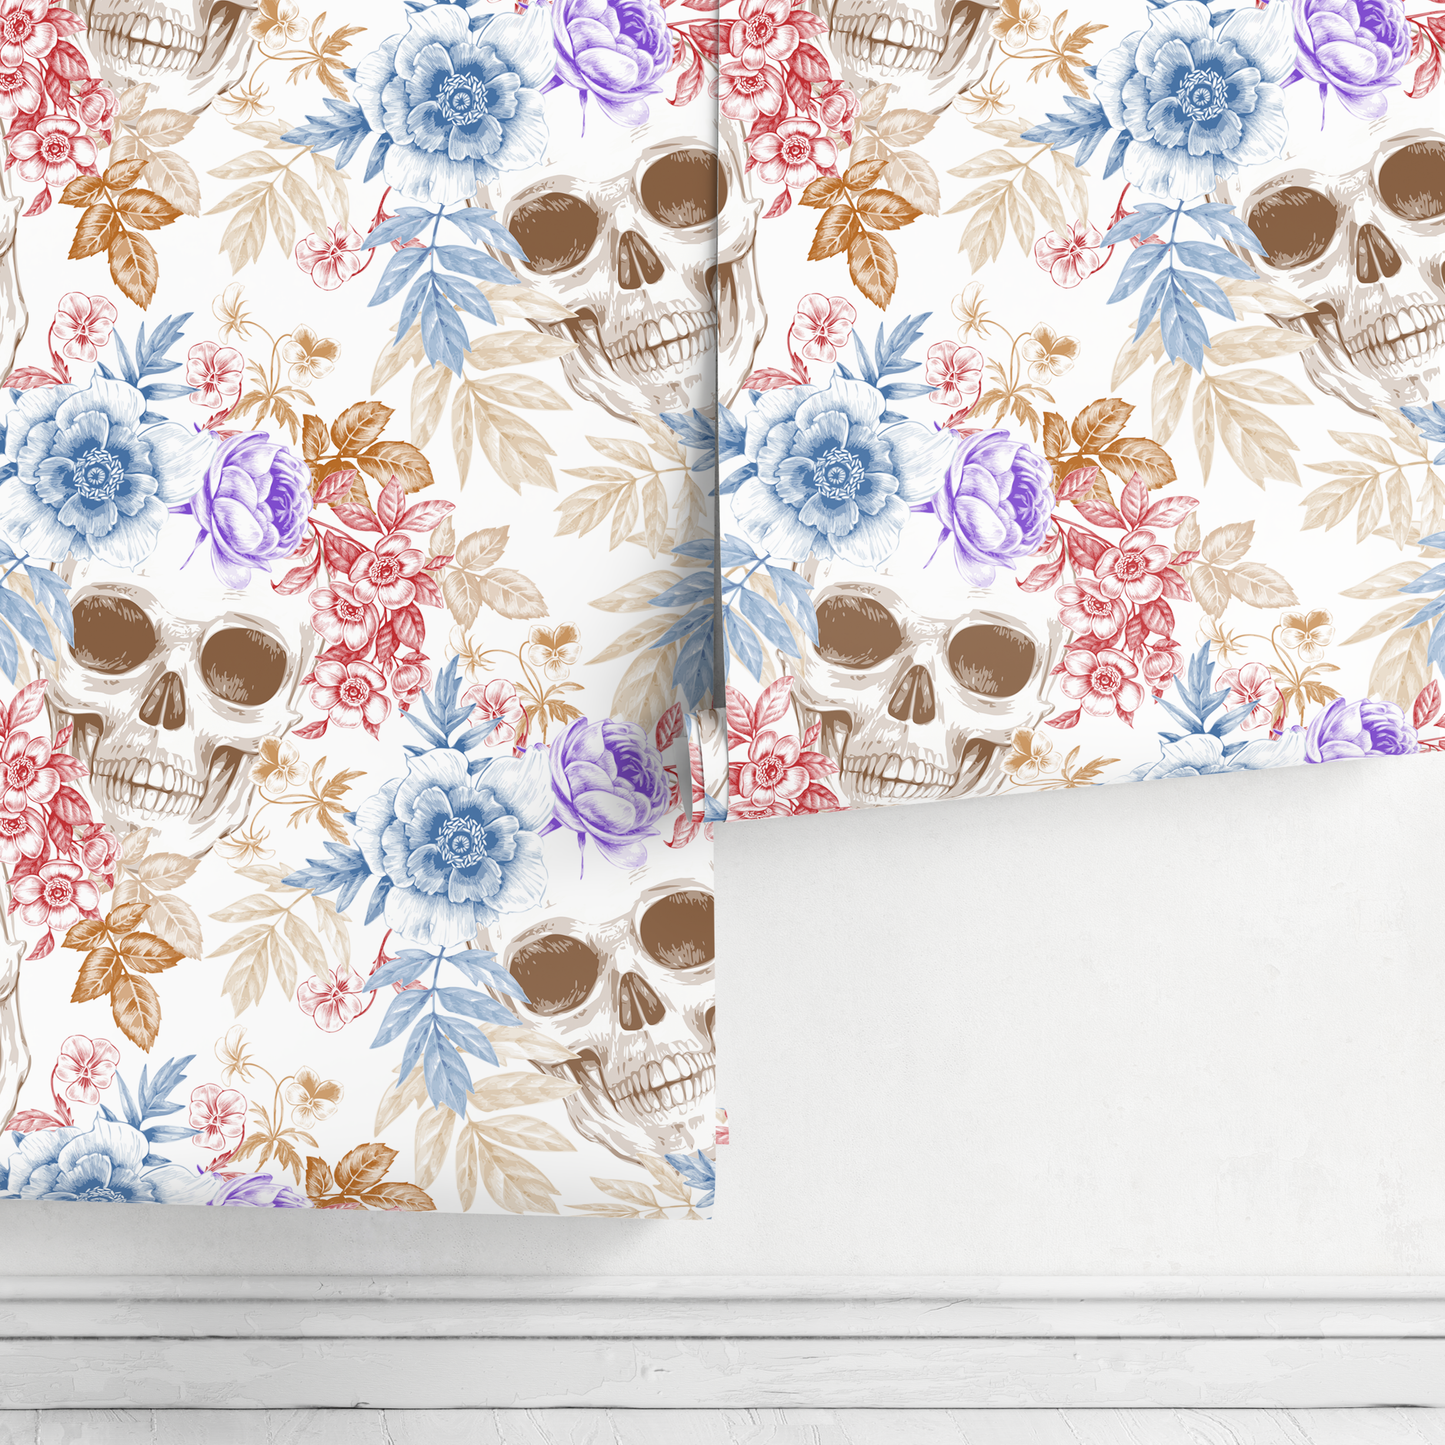 Colorful Tropical Skull Wallpaper Floral Gothic Wallpaper Peel and Stick and Traditional Wallpaper - A364